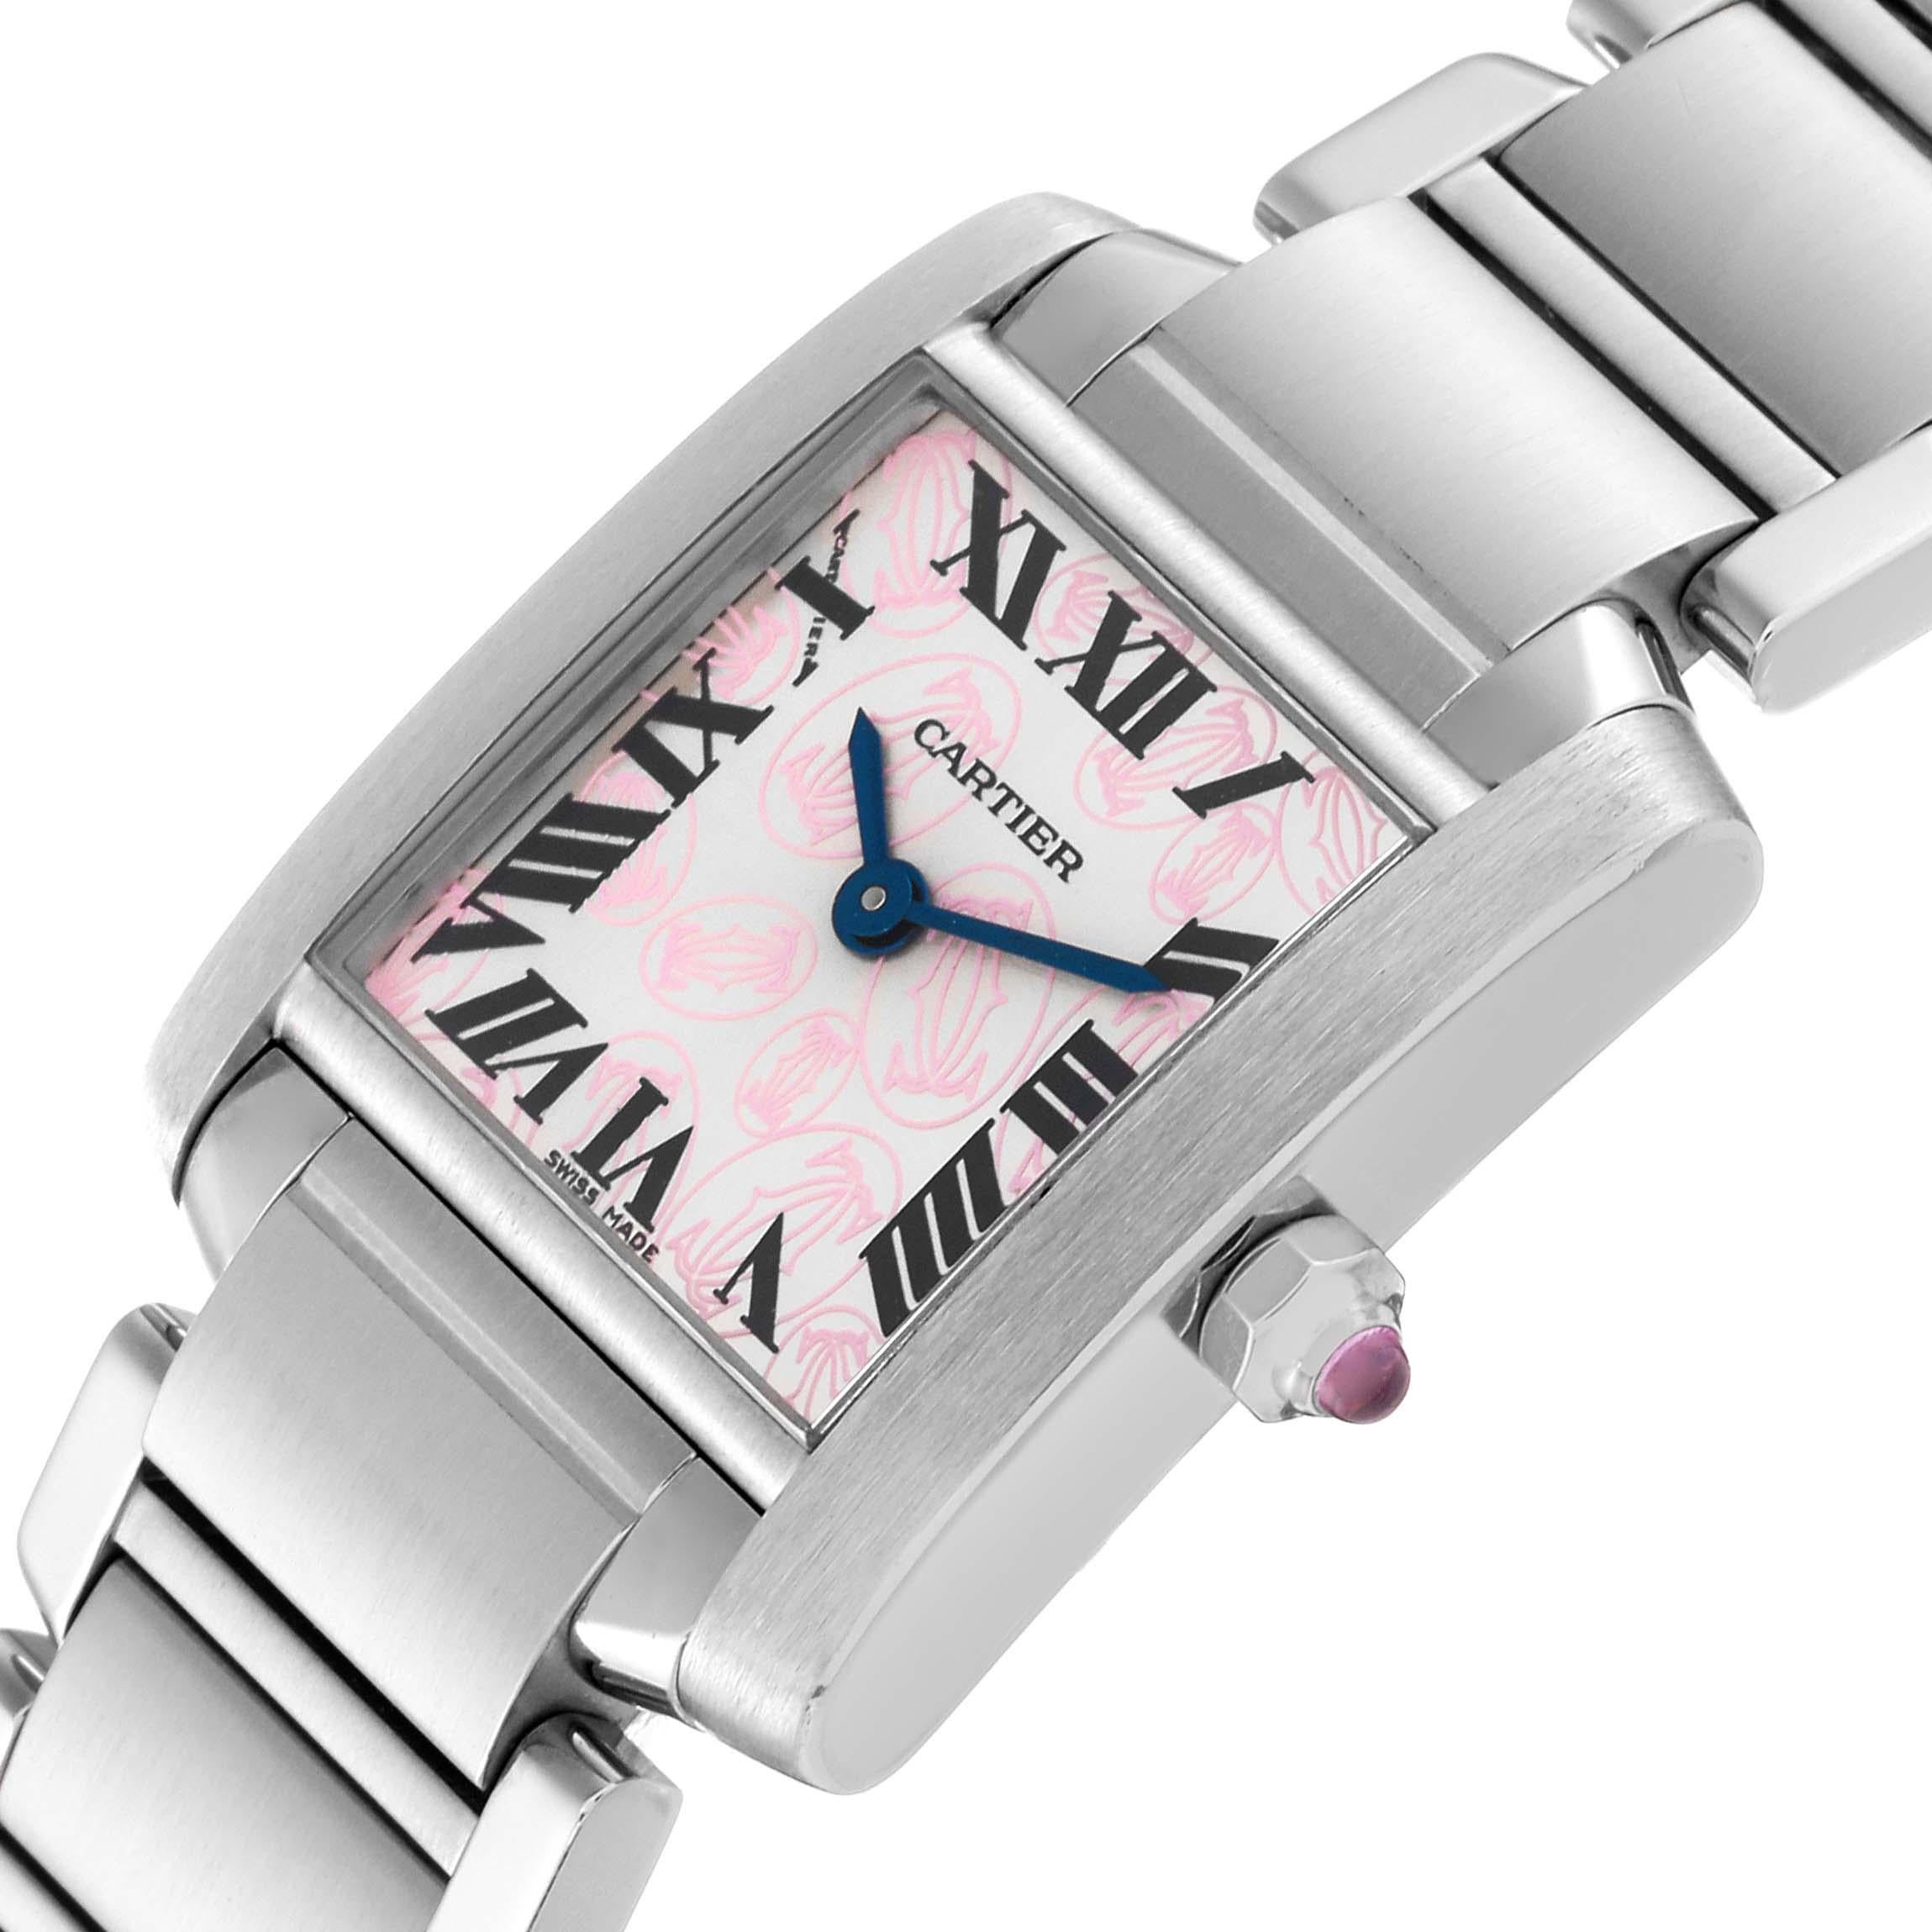 Cartier Tank Francaise Pink Double C Decor Limited Edition Steel Watch W51031Q3 In Excellent Condition For Sale In Atlanta, GA